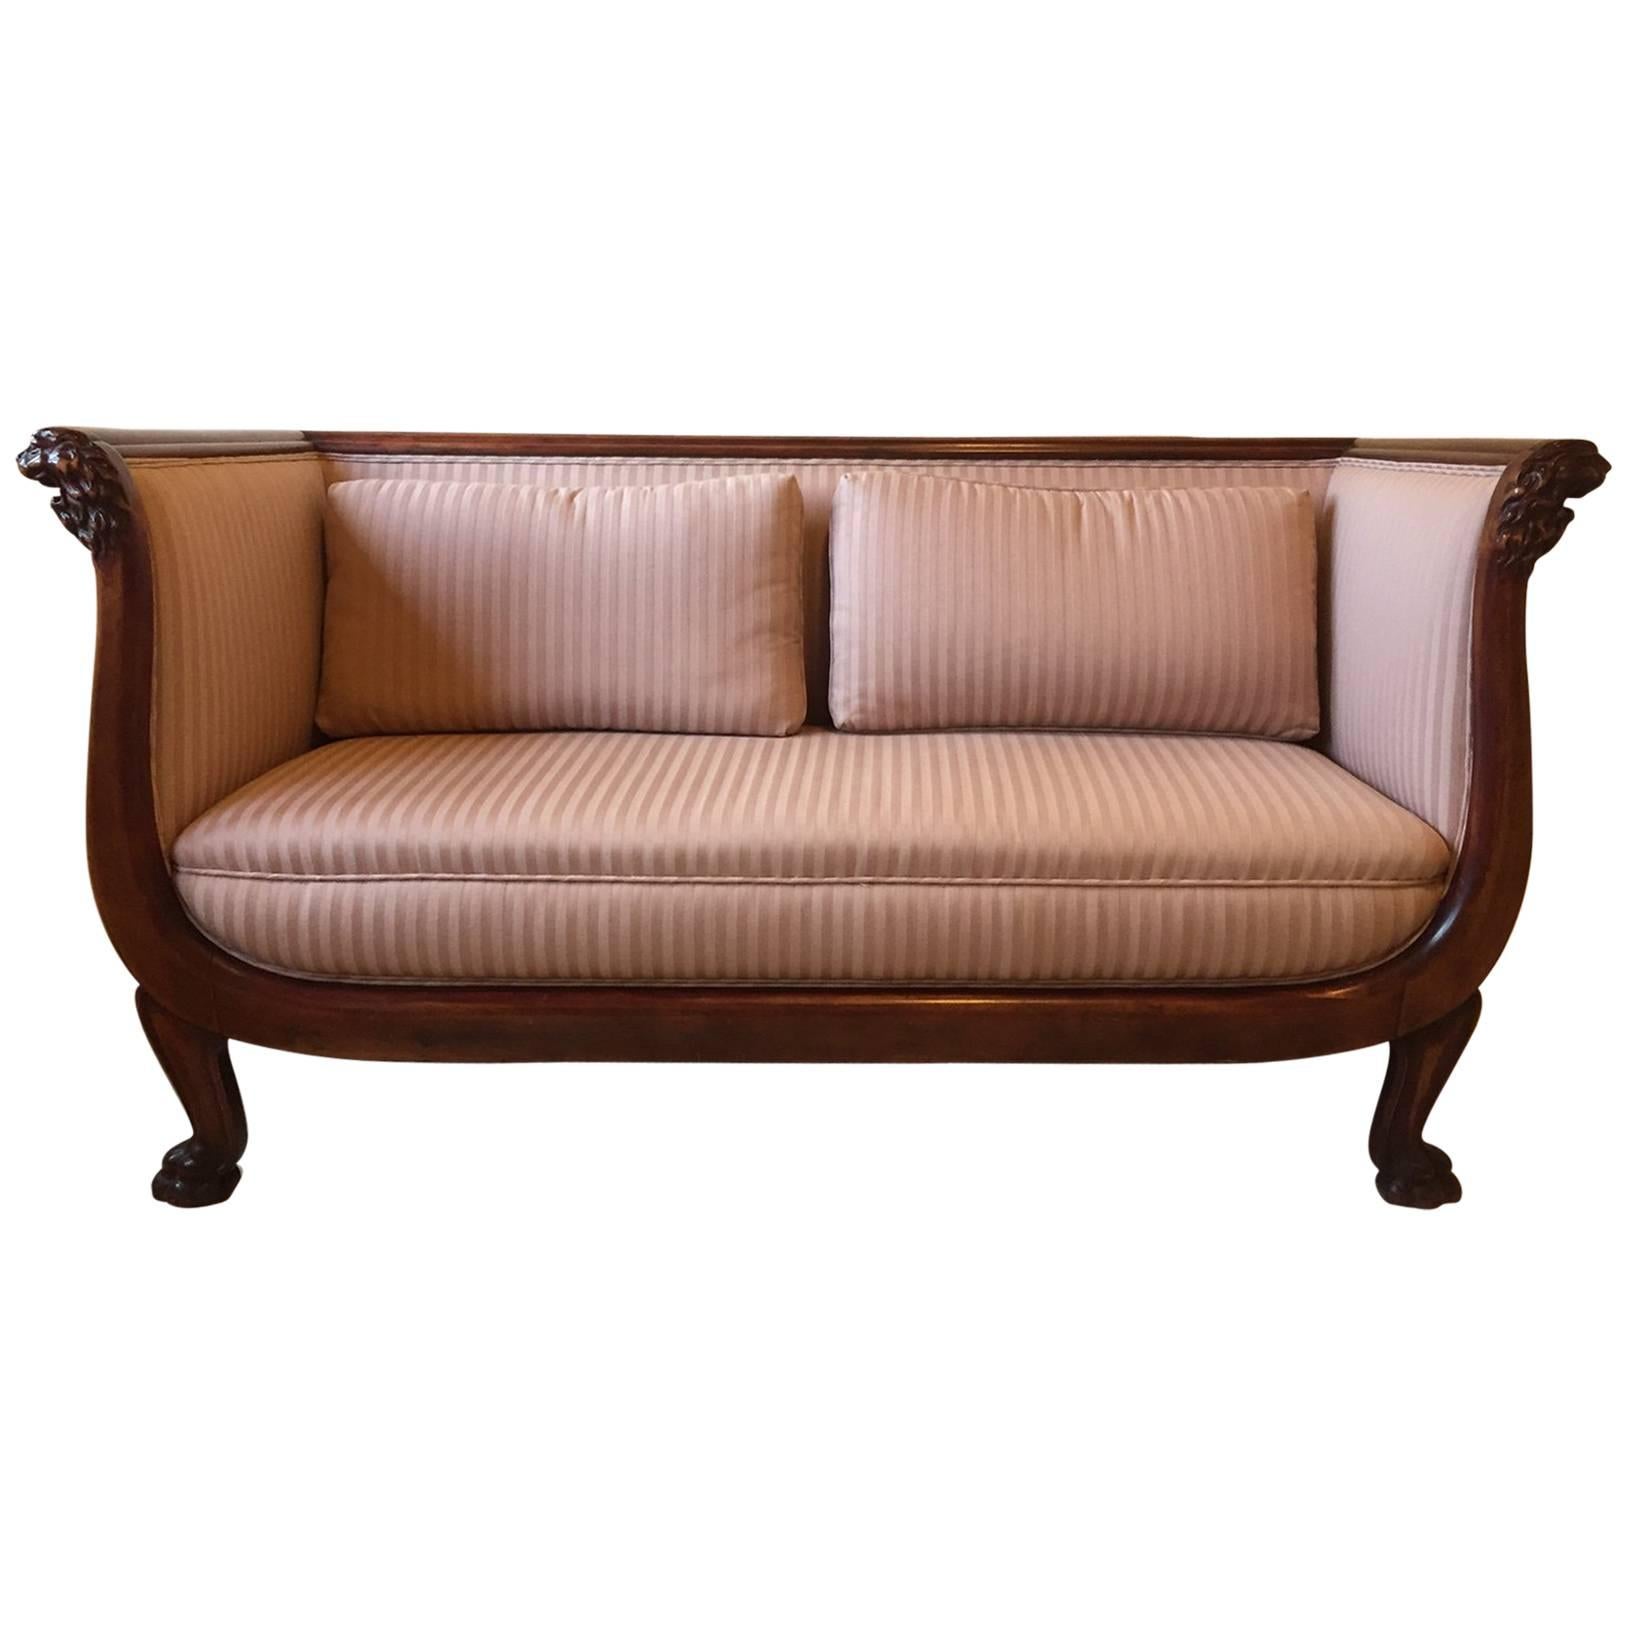 Empire Classical Sofa and Chair For Sale